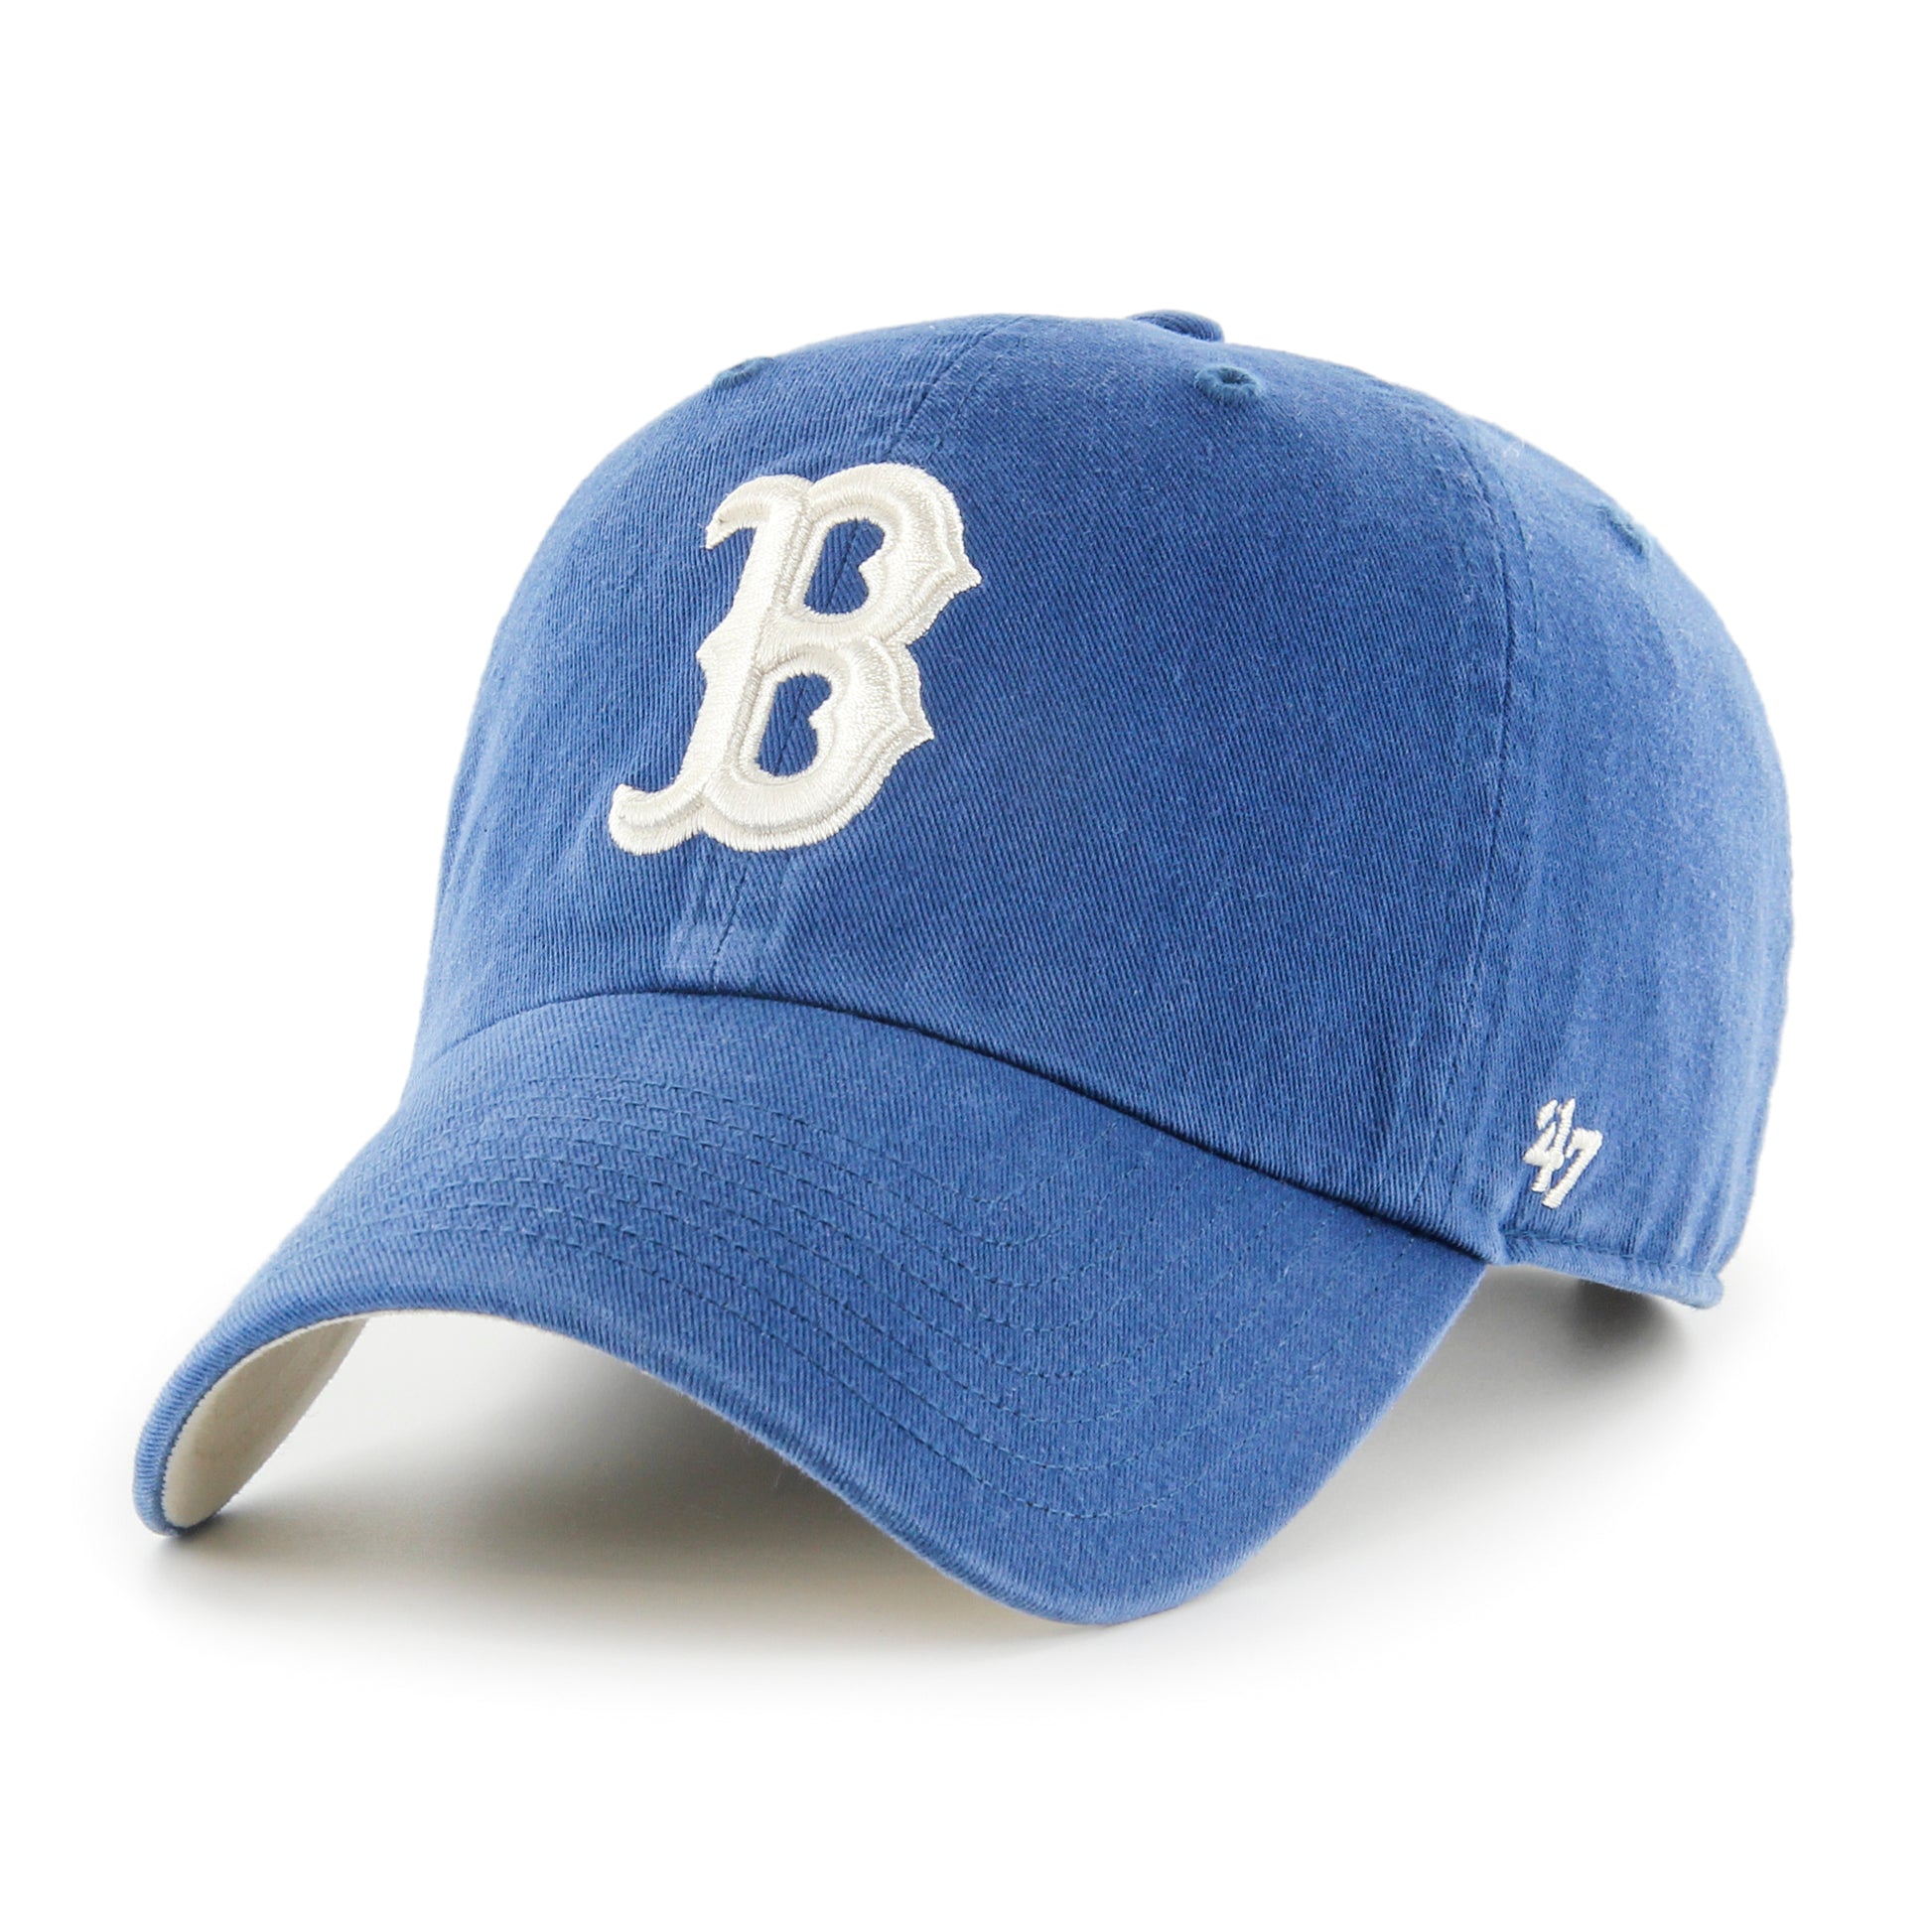 47 Brand Clean Up Boston Red Sox Cap - Camel